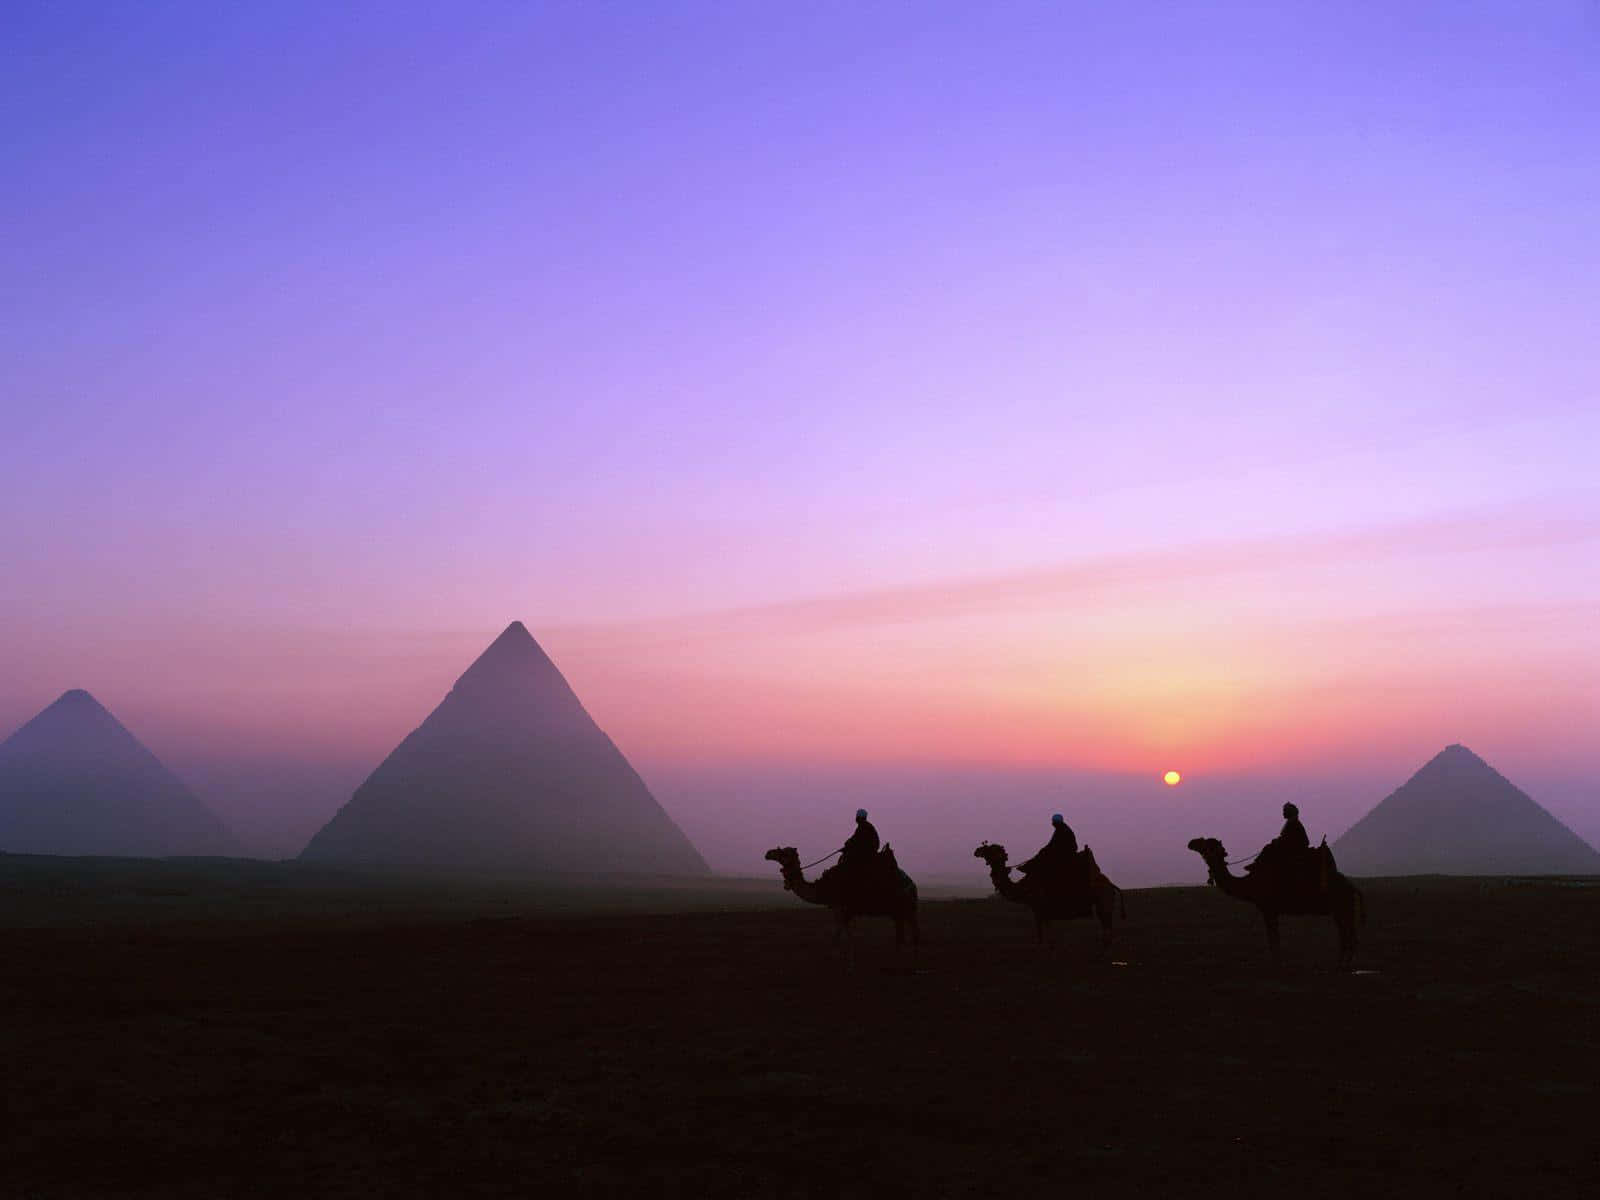 A stunning view of the Giza Pyramids at sunset